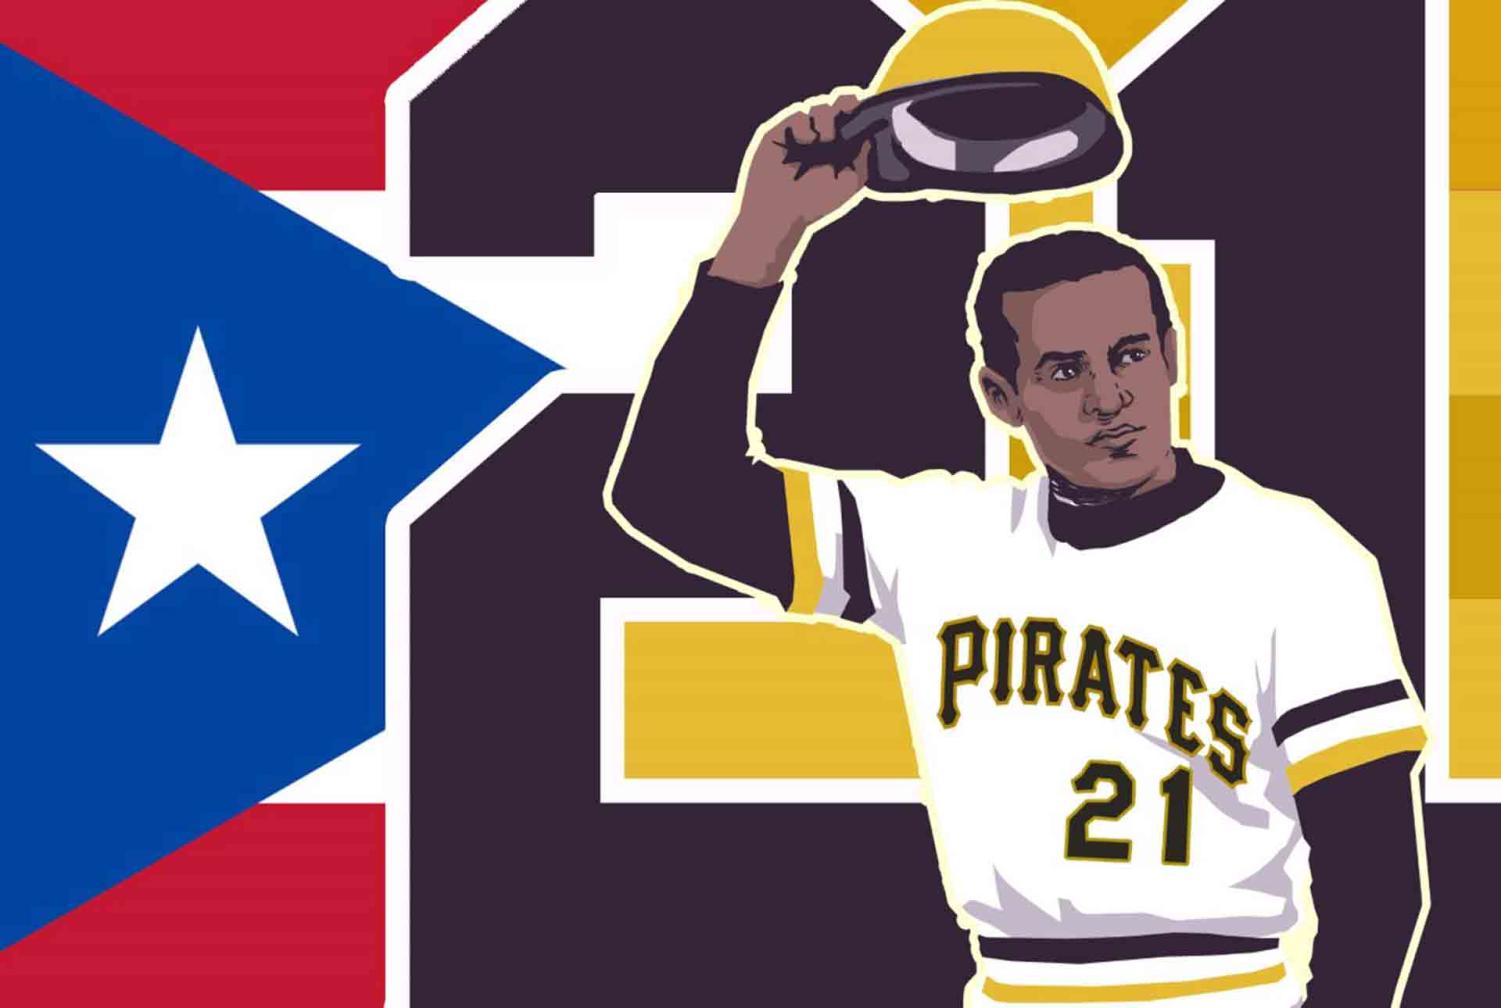 Roberto Clemente Day: Why is Roberto Clemente celebrated and who